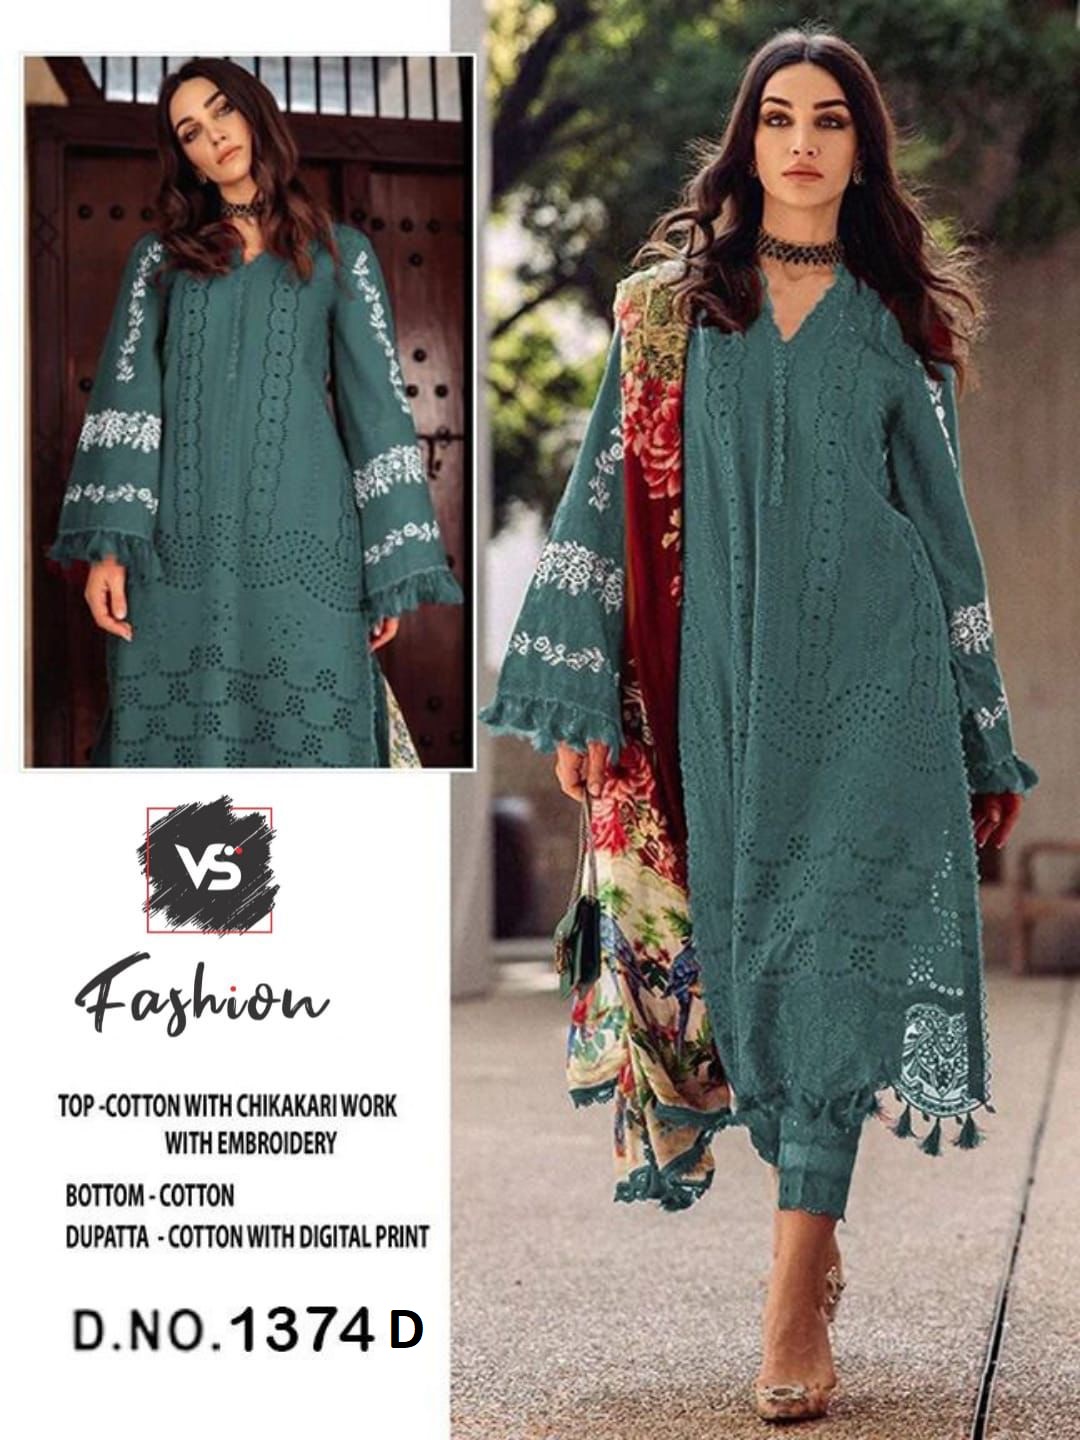 VS FASHION 1374 D PAKISTANI SUITS IN INDIA